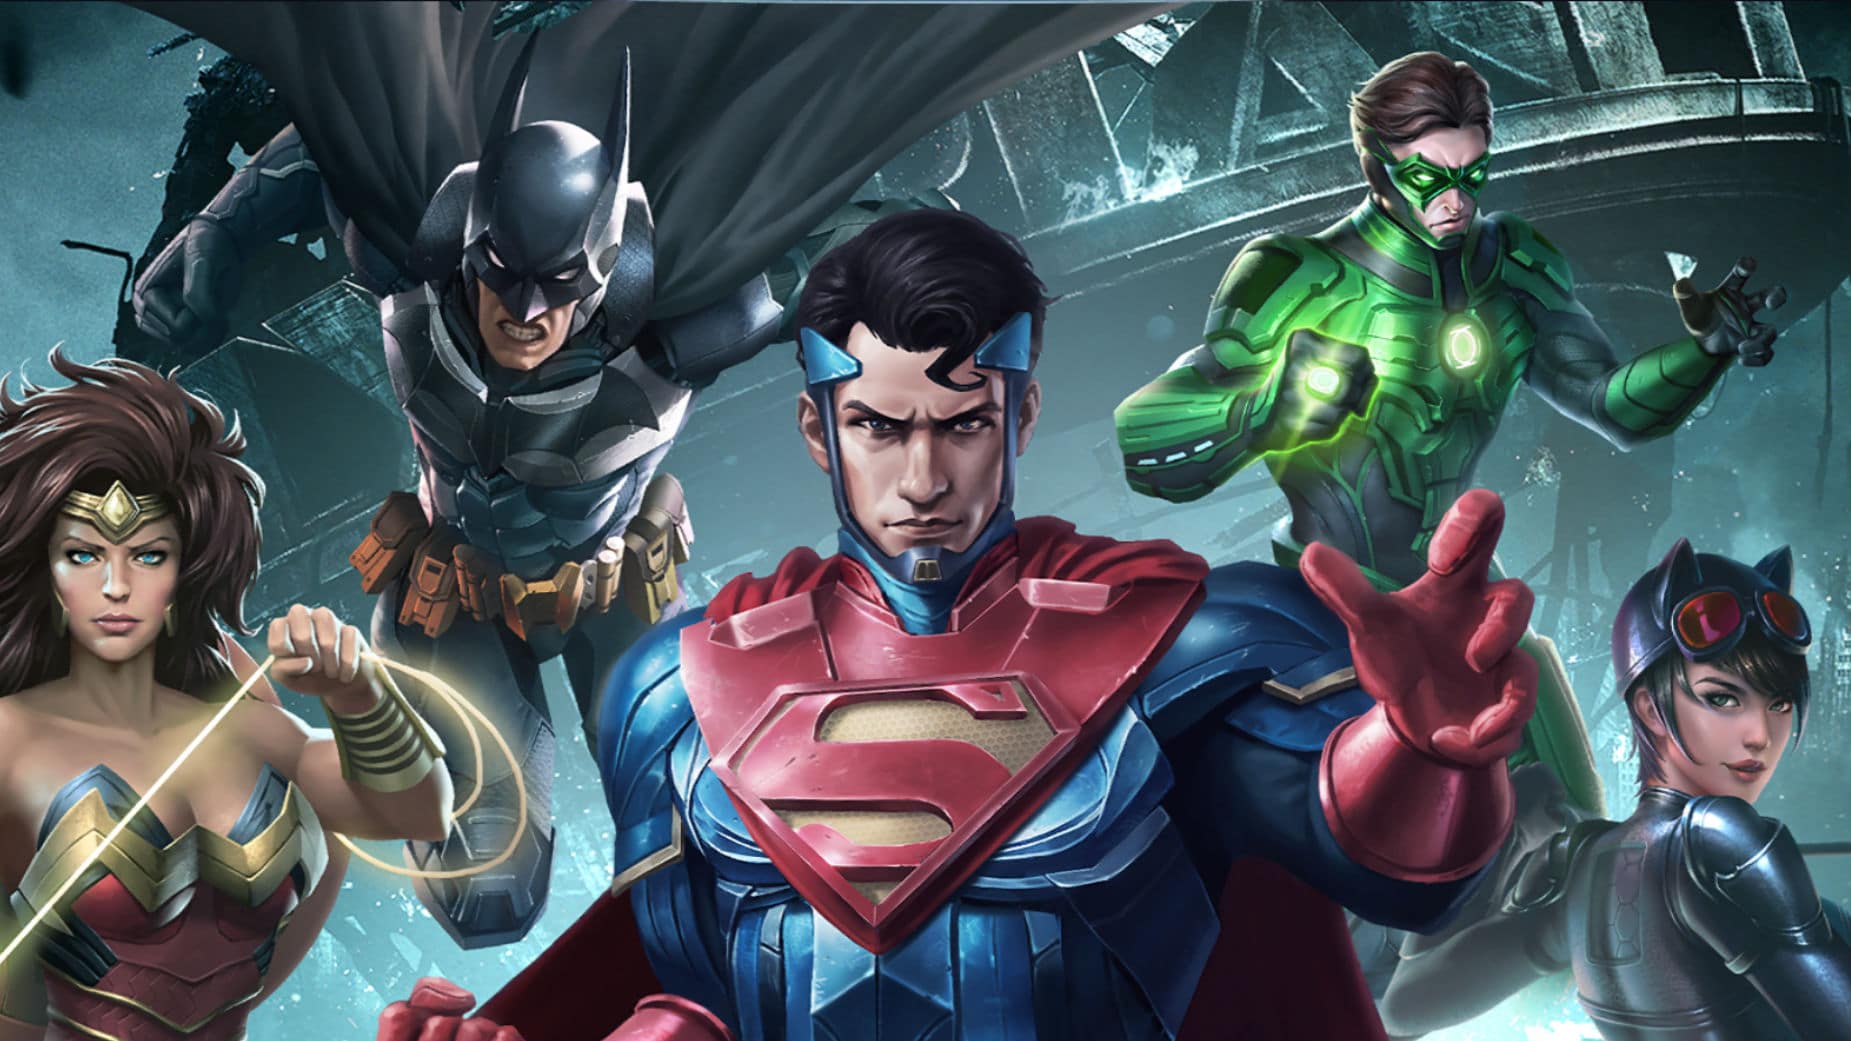 ‘Injustice:’ The 7 Strongest Fighters, Ranked.